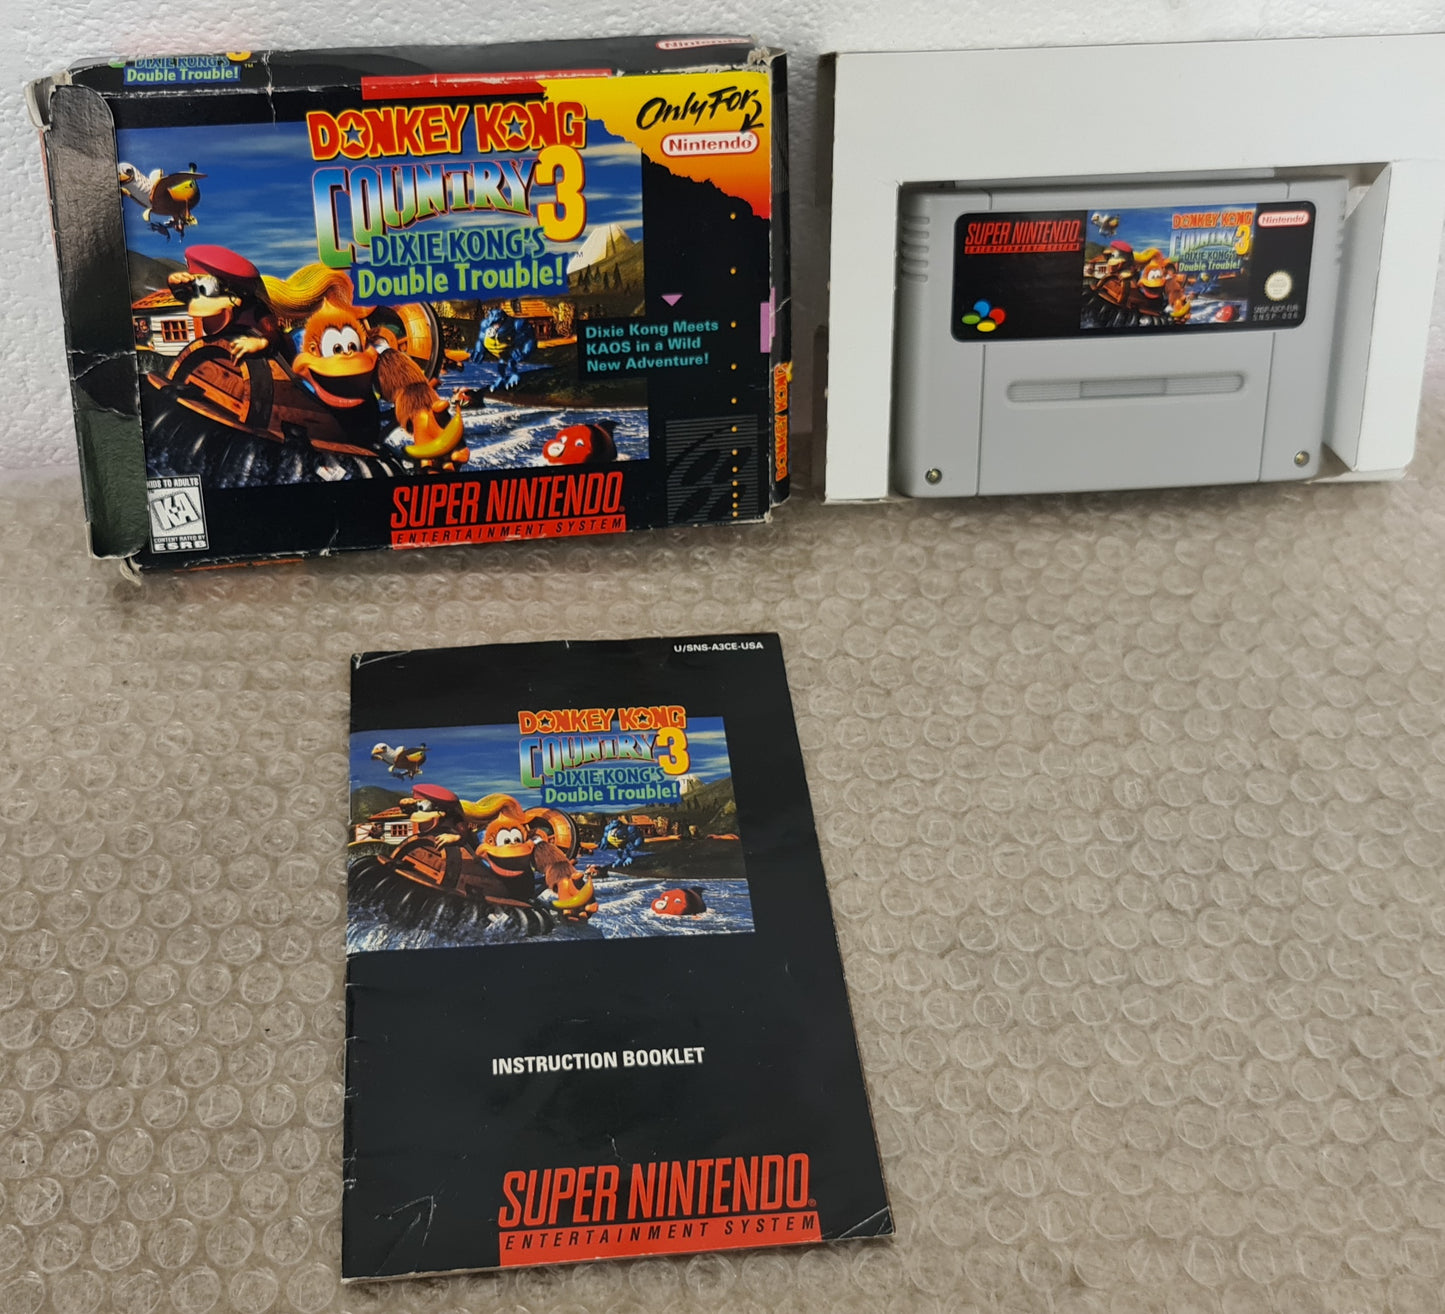 Donkey Kong Country 3 Super Nintendo Entertainment System (SNES) Game